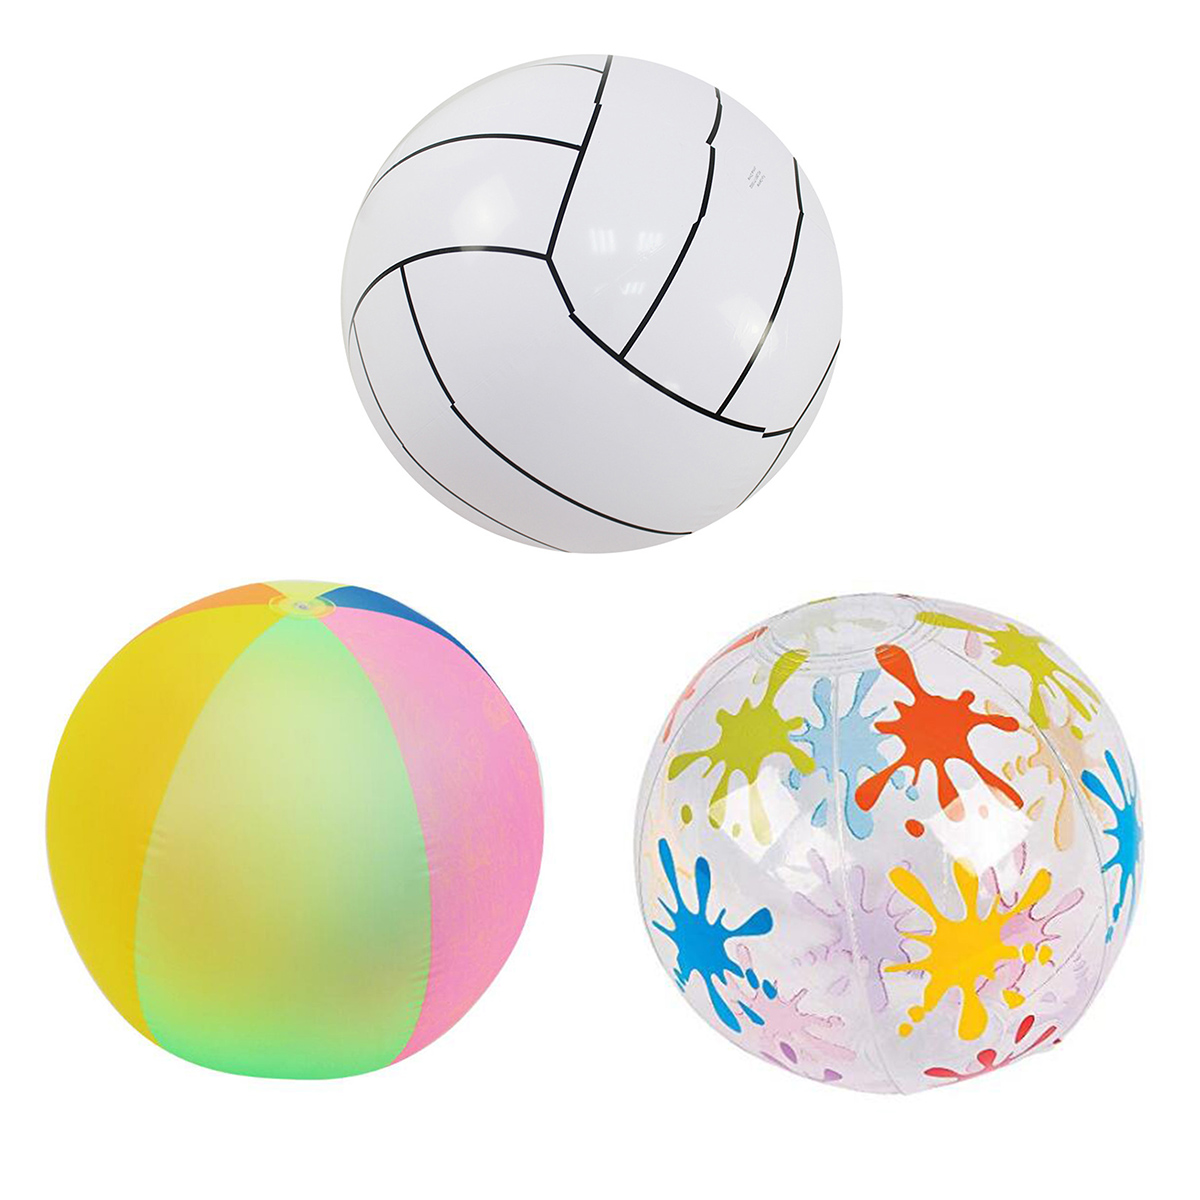 80cm-Inflatable-Beach-Ball-Adult-Kids-Swimming-Pool-Water-Toys-Summer-Water-Sport-Play-Ball-Gift-Cam-1723675-3